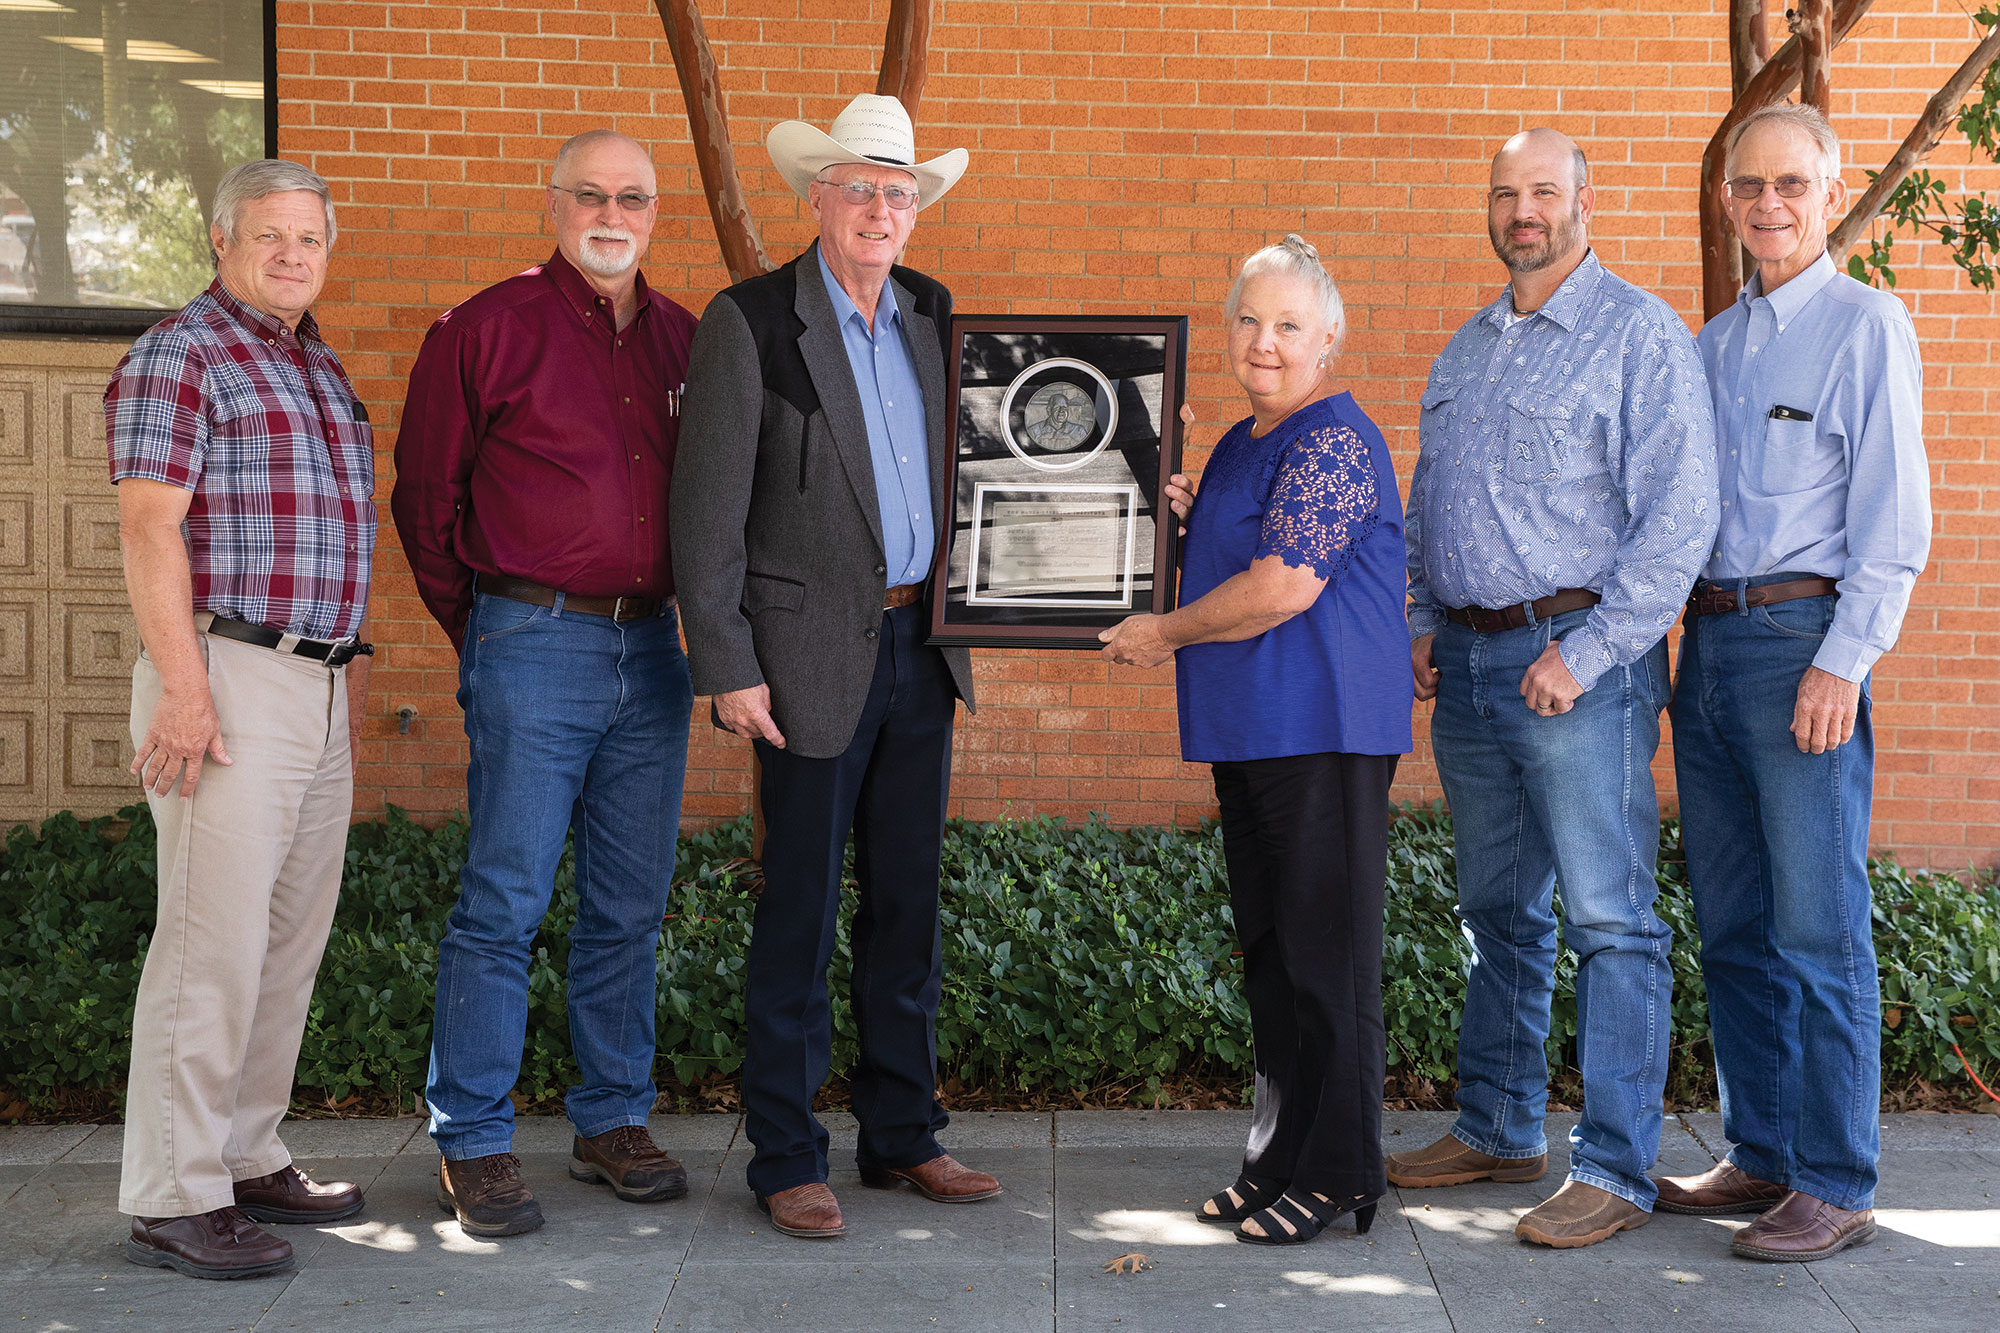 William and Karen Payne were recognized as the 2019 Leonard Wyatt Memorial Outstanding Cooperator Award recipients by Noble Research Institute.